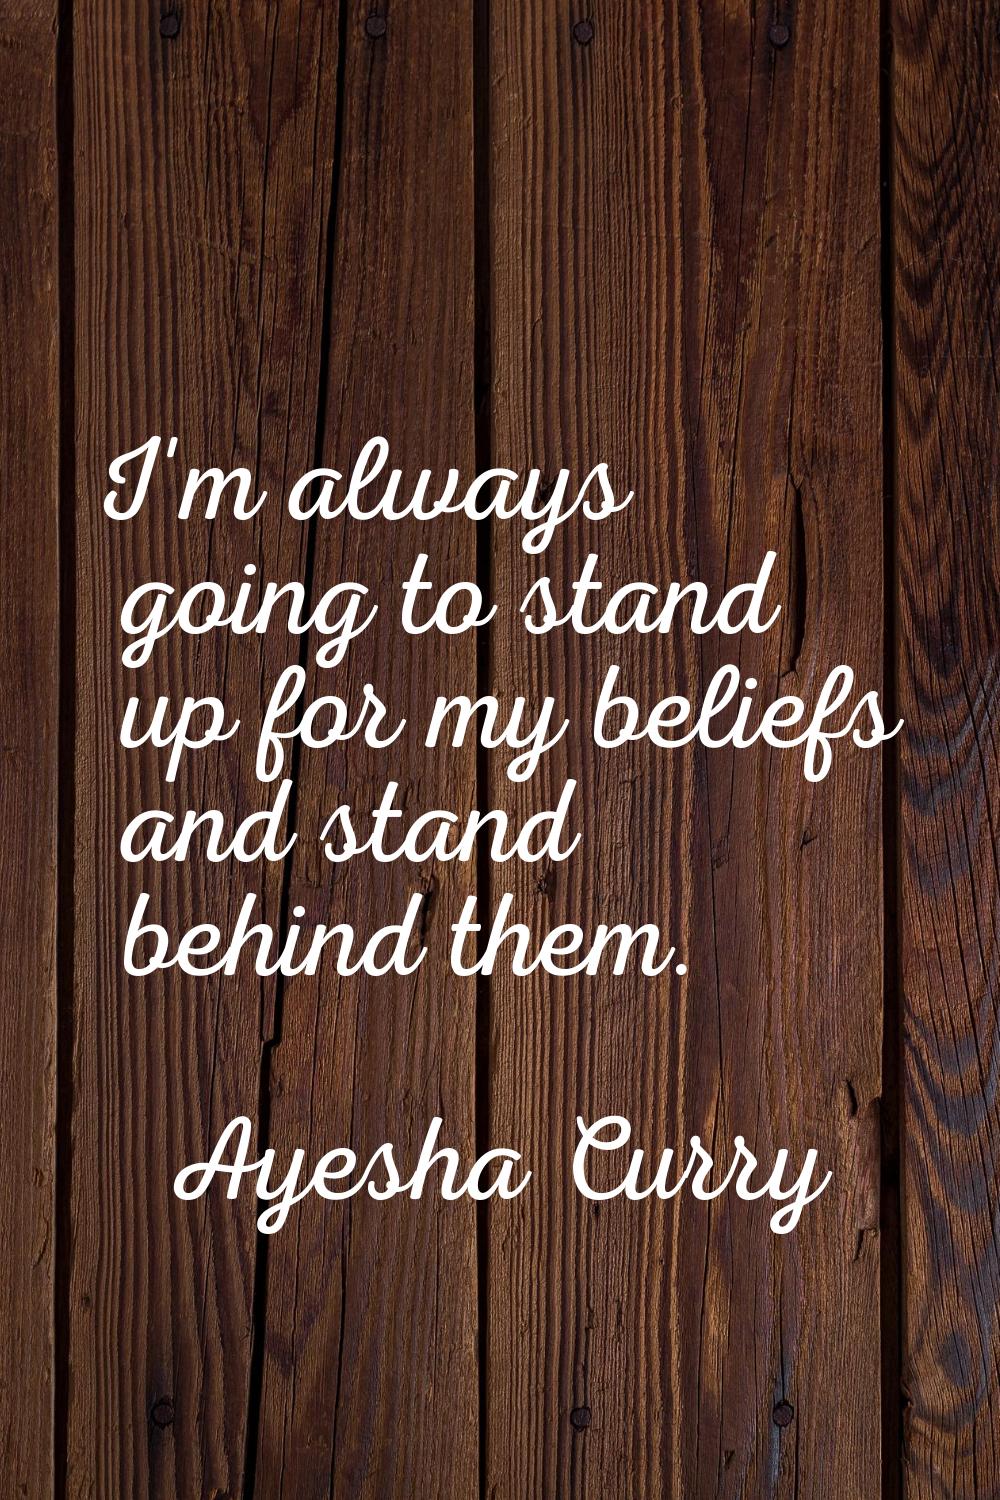 I'm always going to stand up for my beliefs and stand behind them.